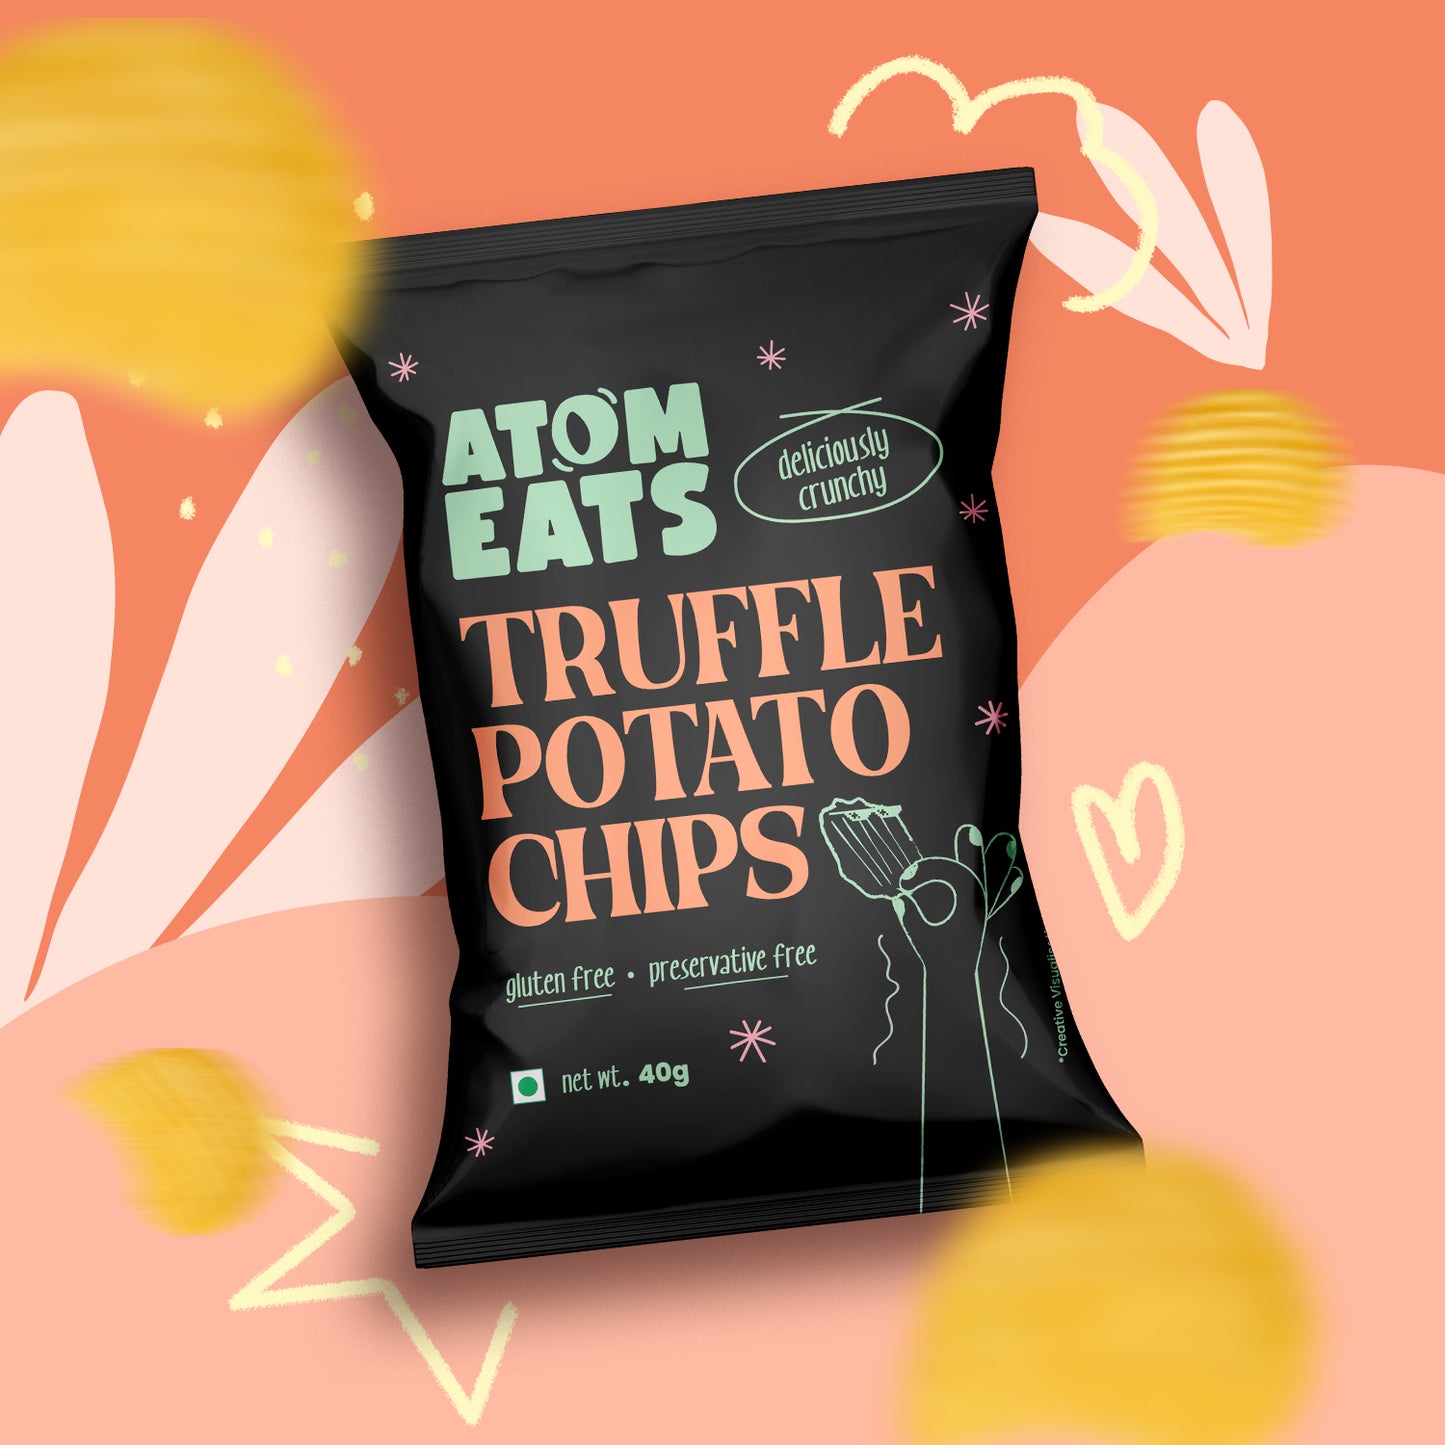 Ruffled Black Truffle & Cheese Sprinkled Potato Chips | 40g Pack by Atom Eats